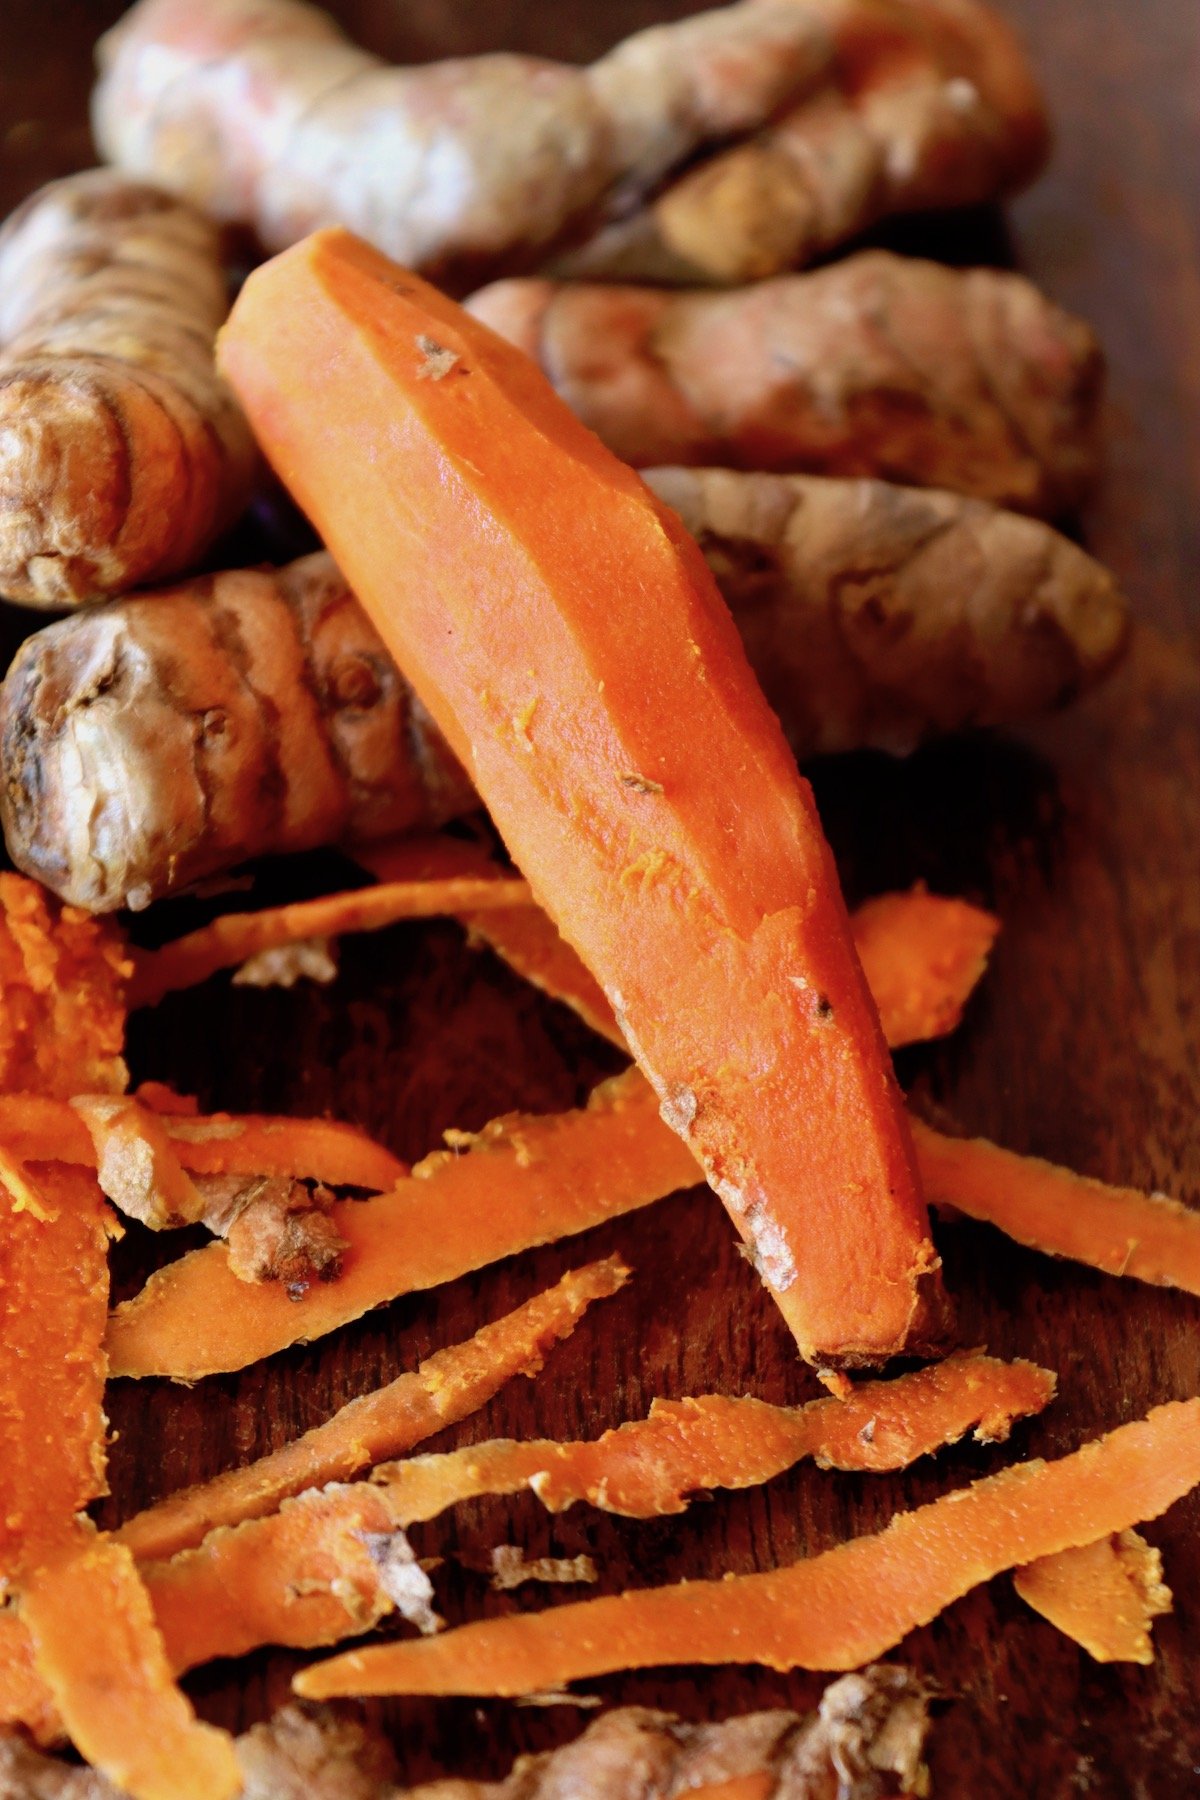 Peeled Turmeric root that looks like a carrot, with peels.